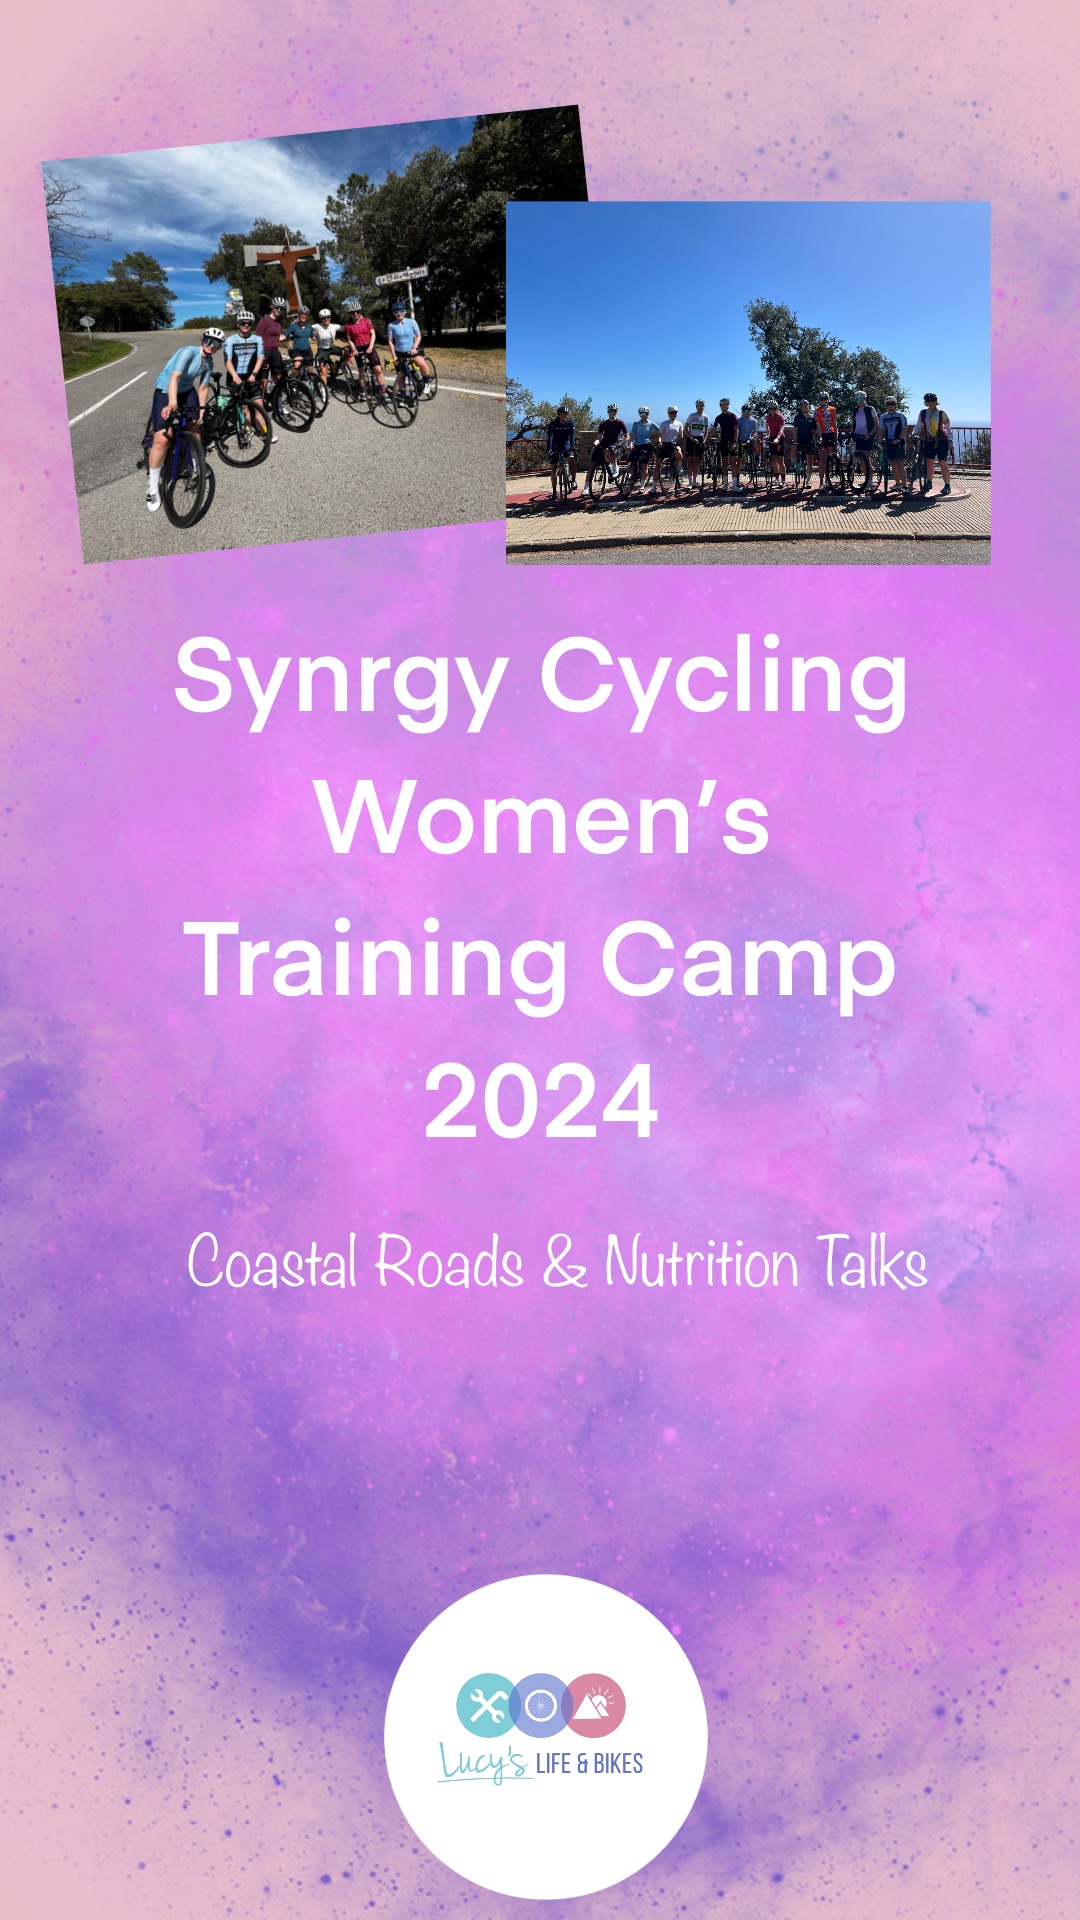 Synrgy Cycling Women's Training Camp 2024 - Coastal Roads and Nutrition Talks Title Photo